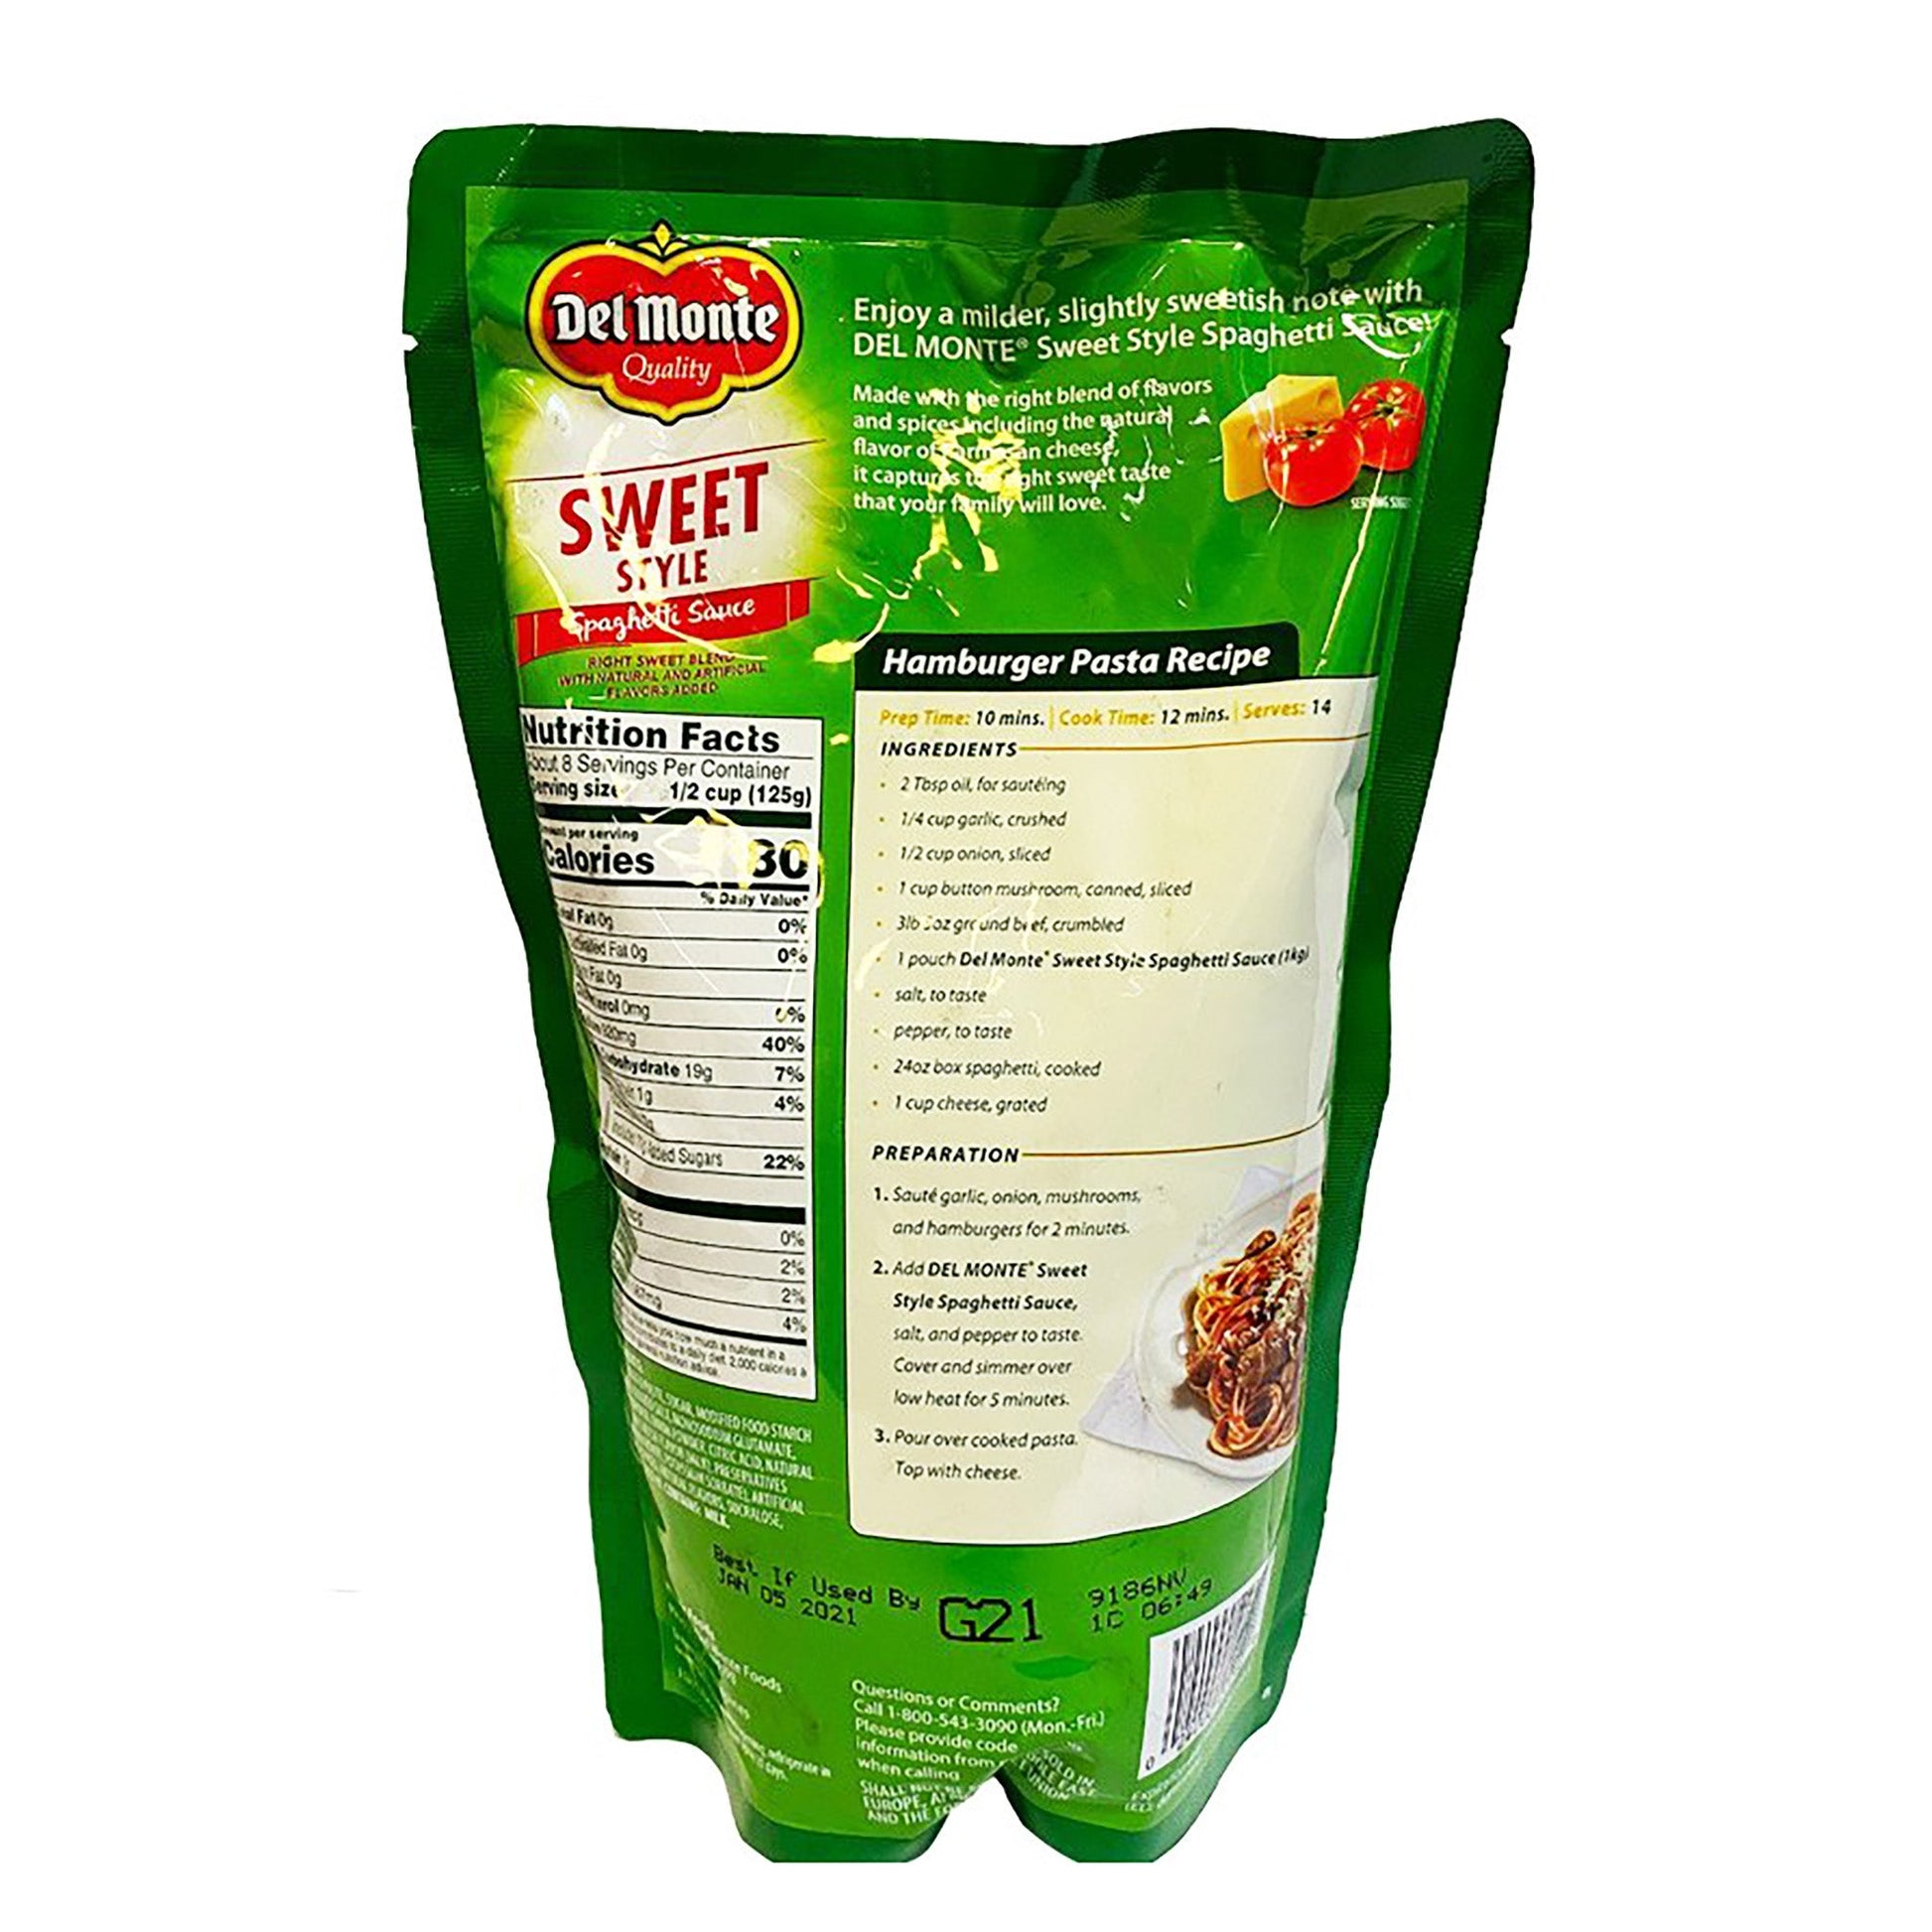 Back graphic image of Del Monte Spaghetti Sauce - Sweet Style 35.2oz